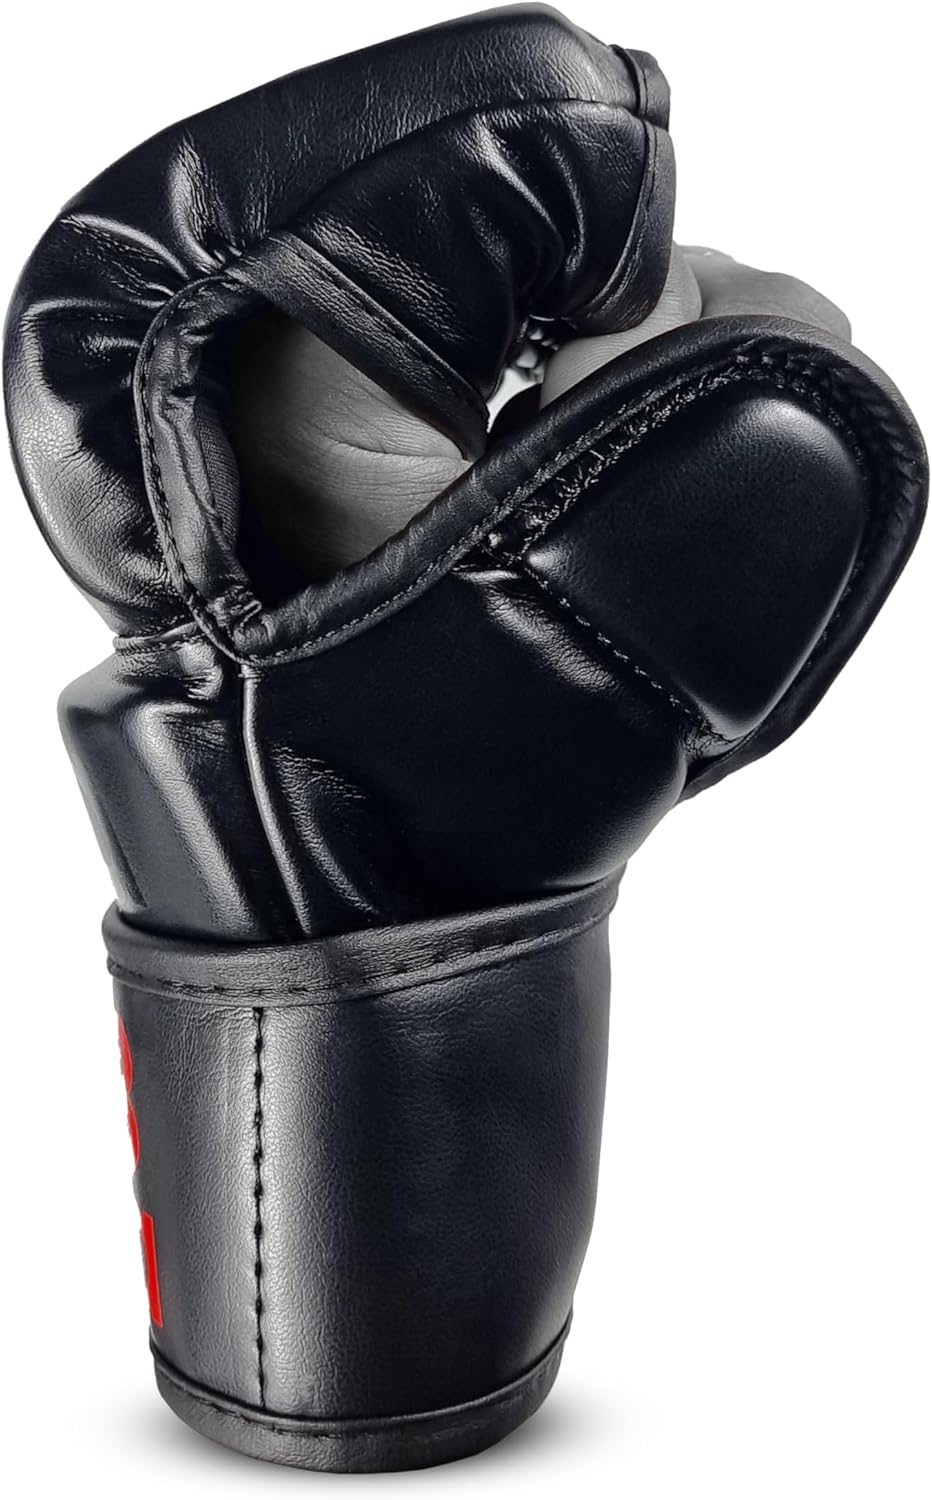 cage-fighting-punching-bag-gloves-grappling